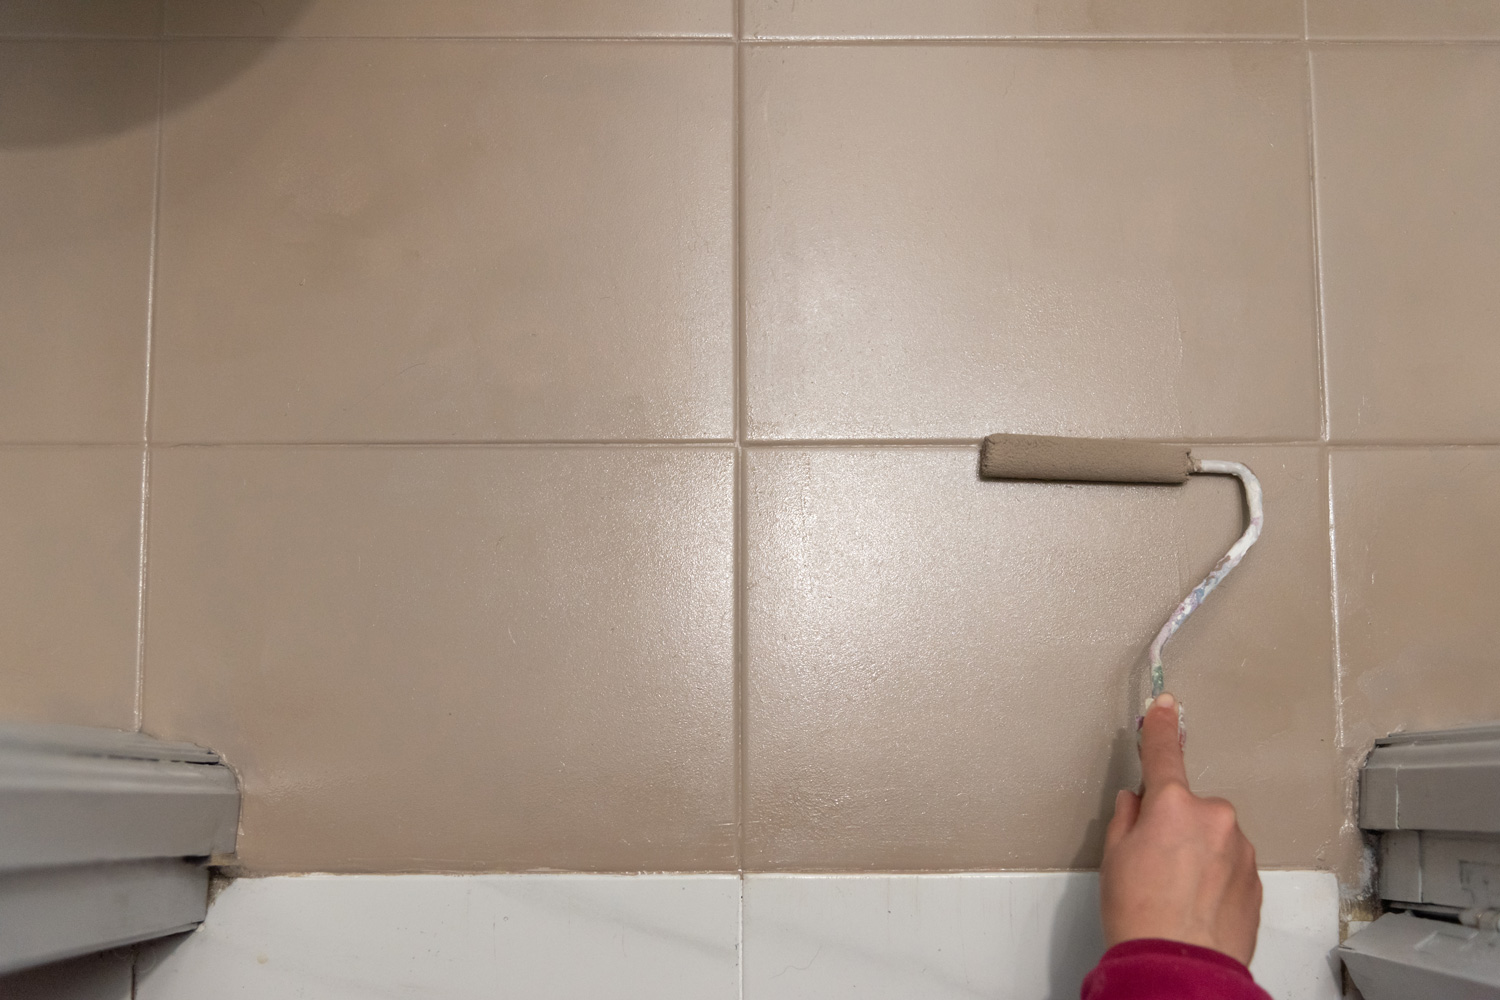 Human-hand-holding-paint-roller-over-floor-tile-in-the-bathroom-as-restyling-home-decoration-and-doing-cheap-maintenance.